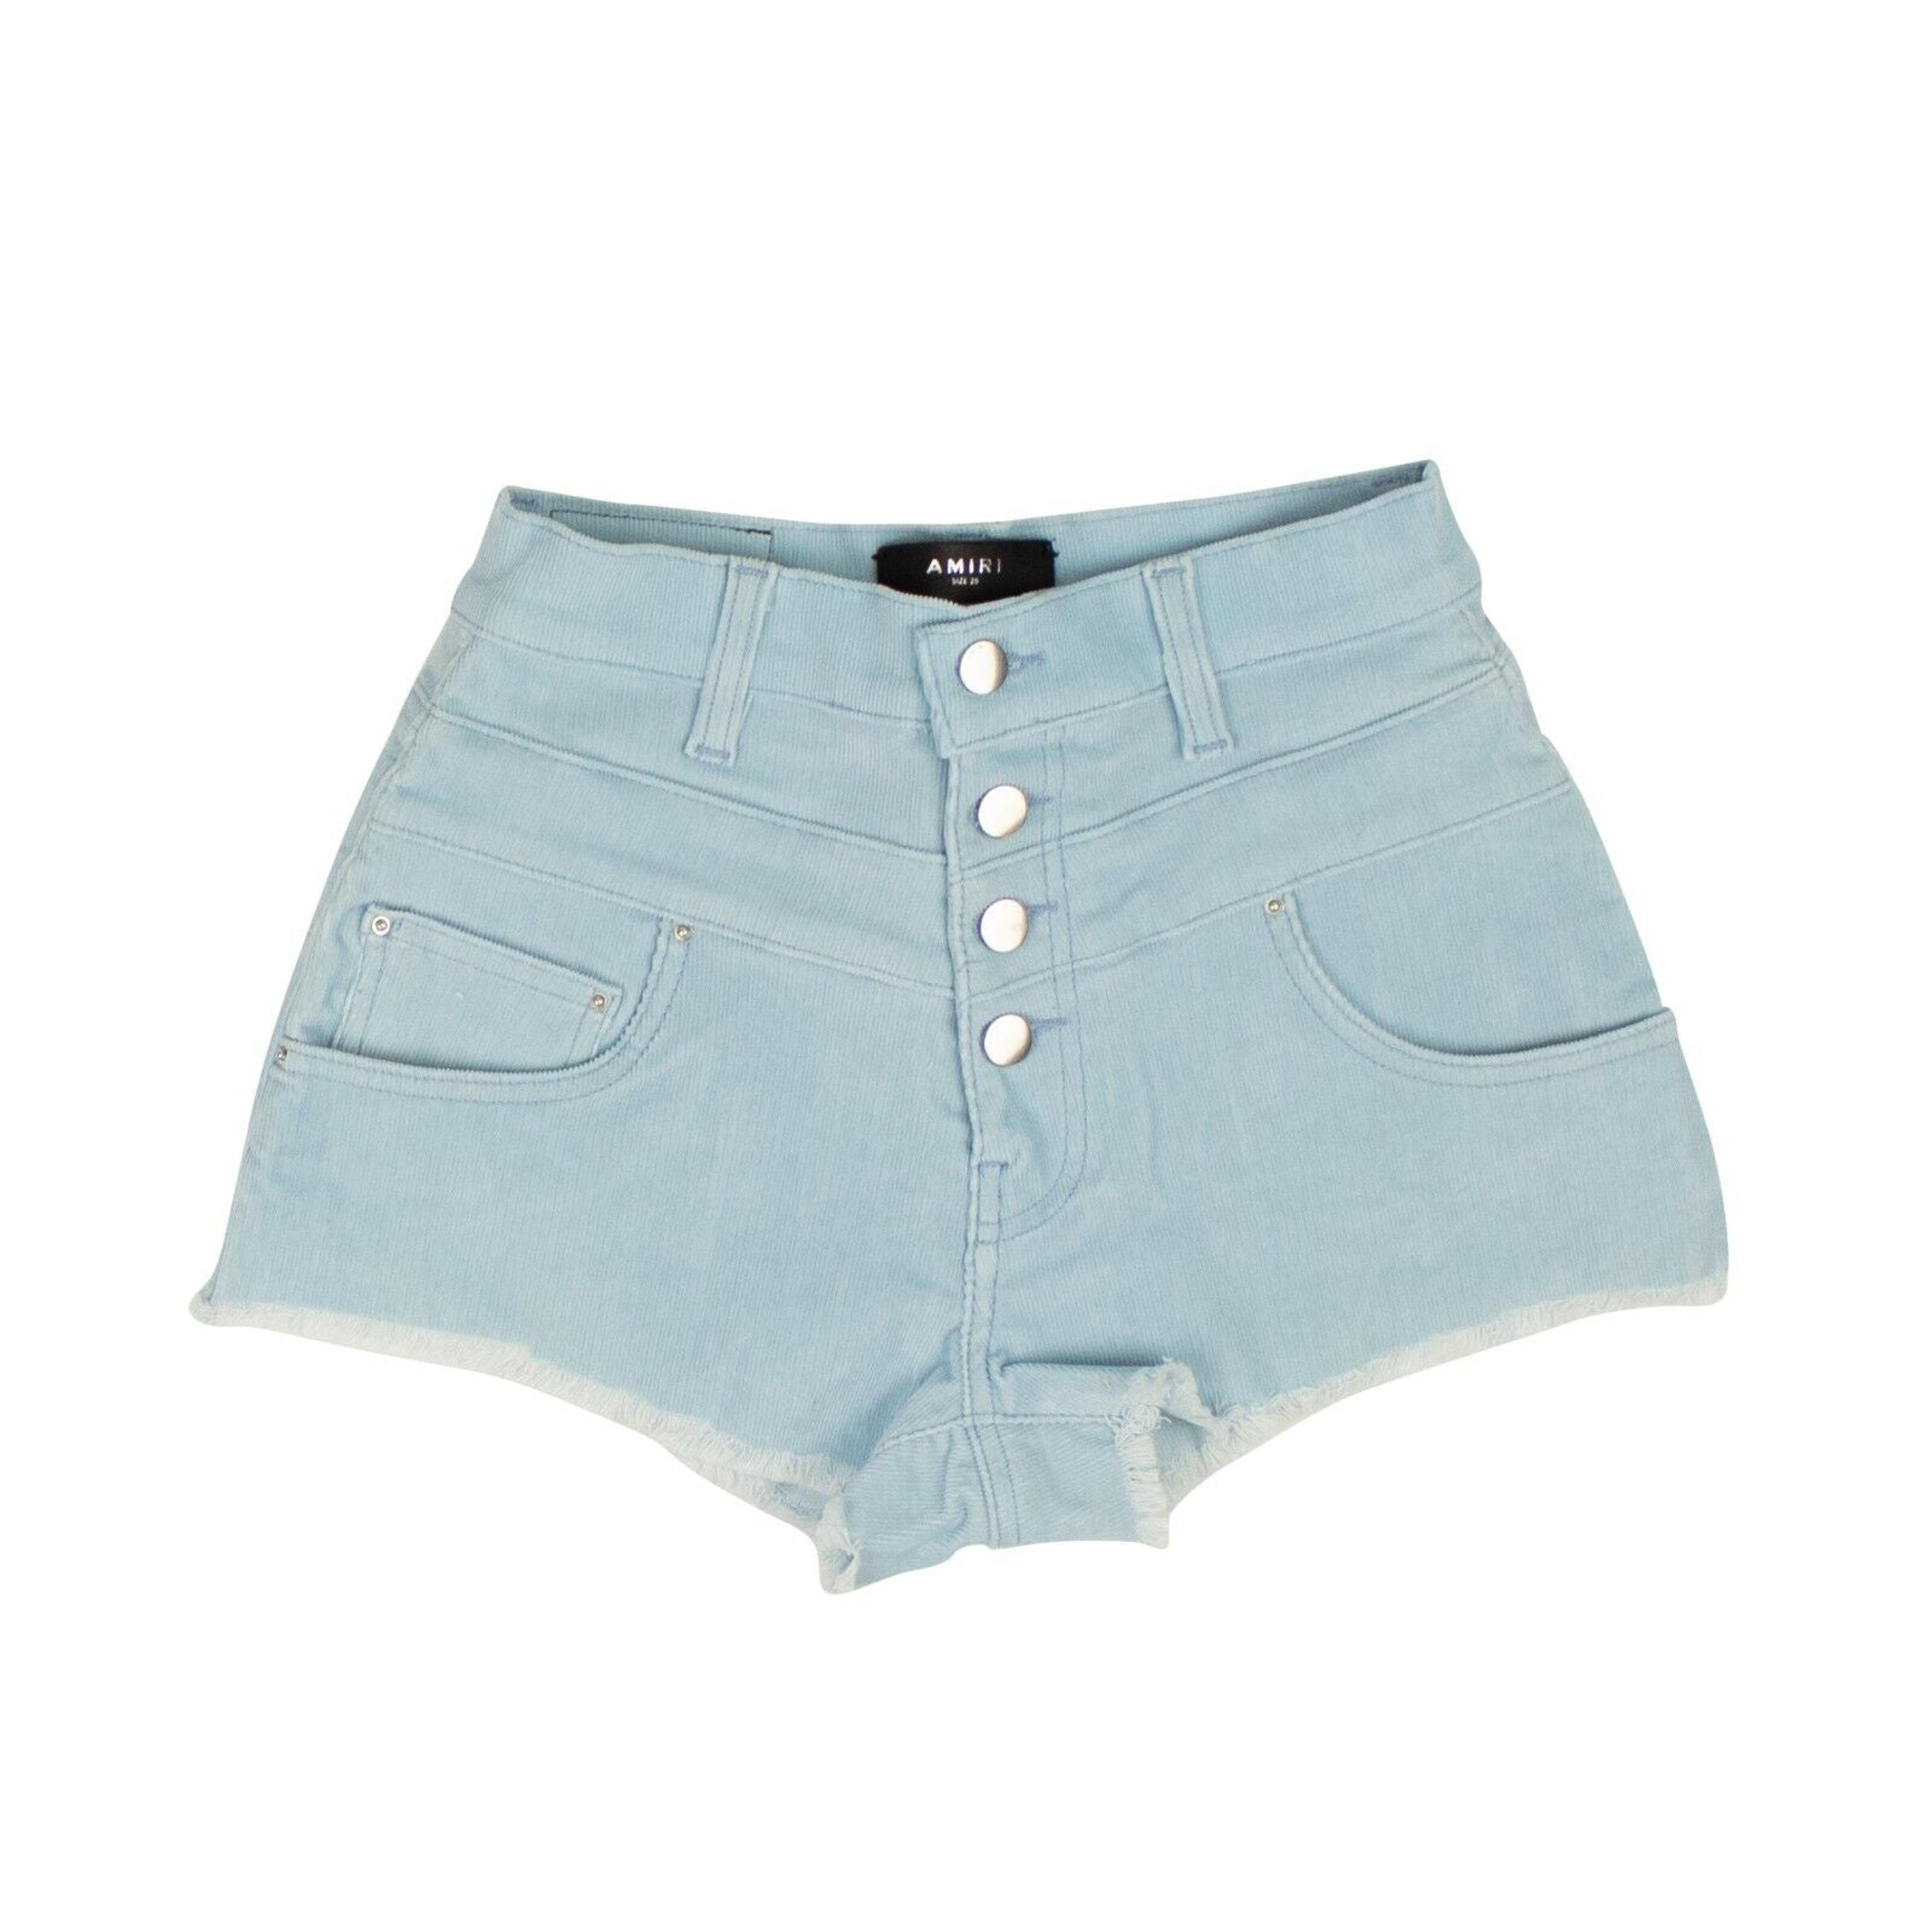 Alternate View 1 of Blue Corduroy High Waisted Shorts